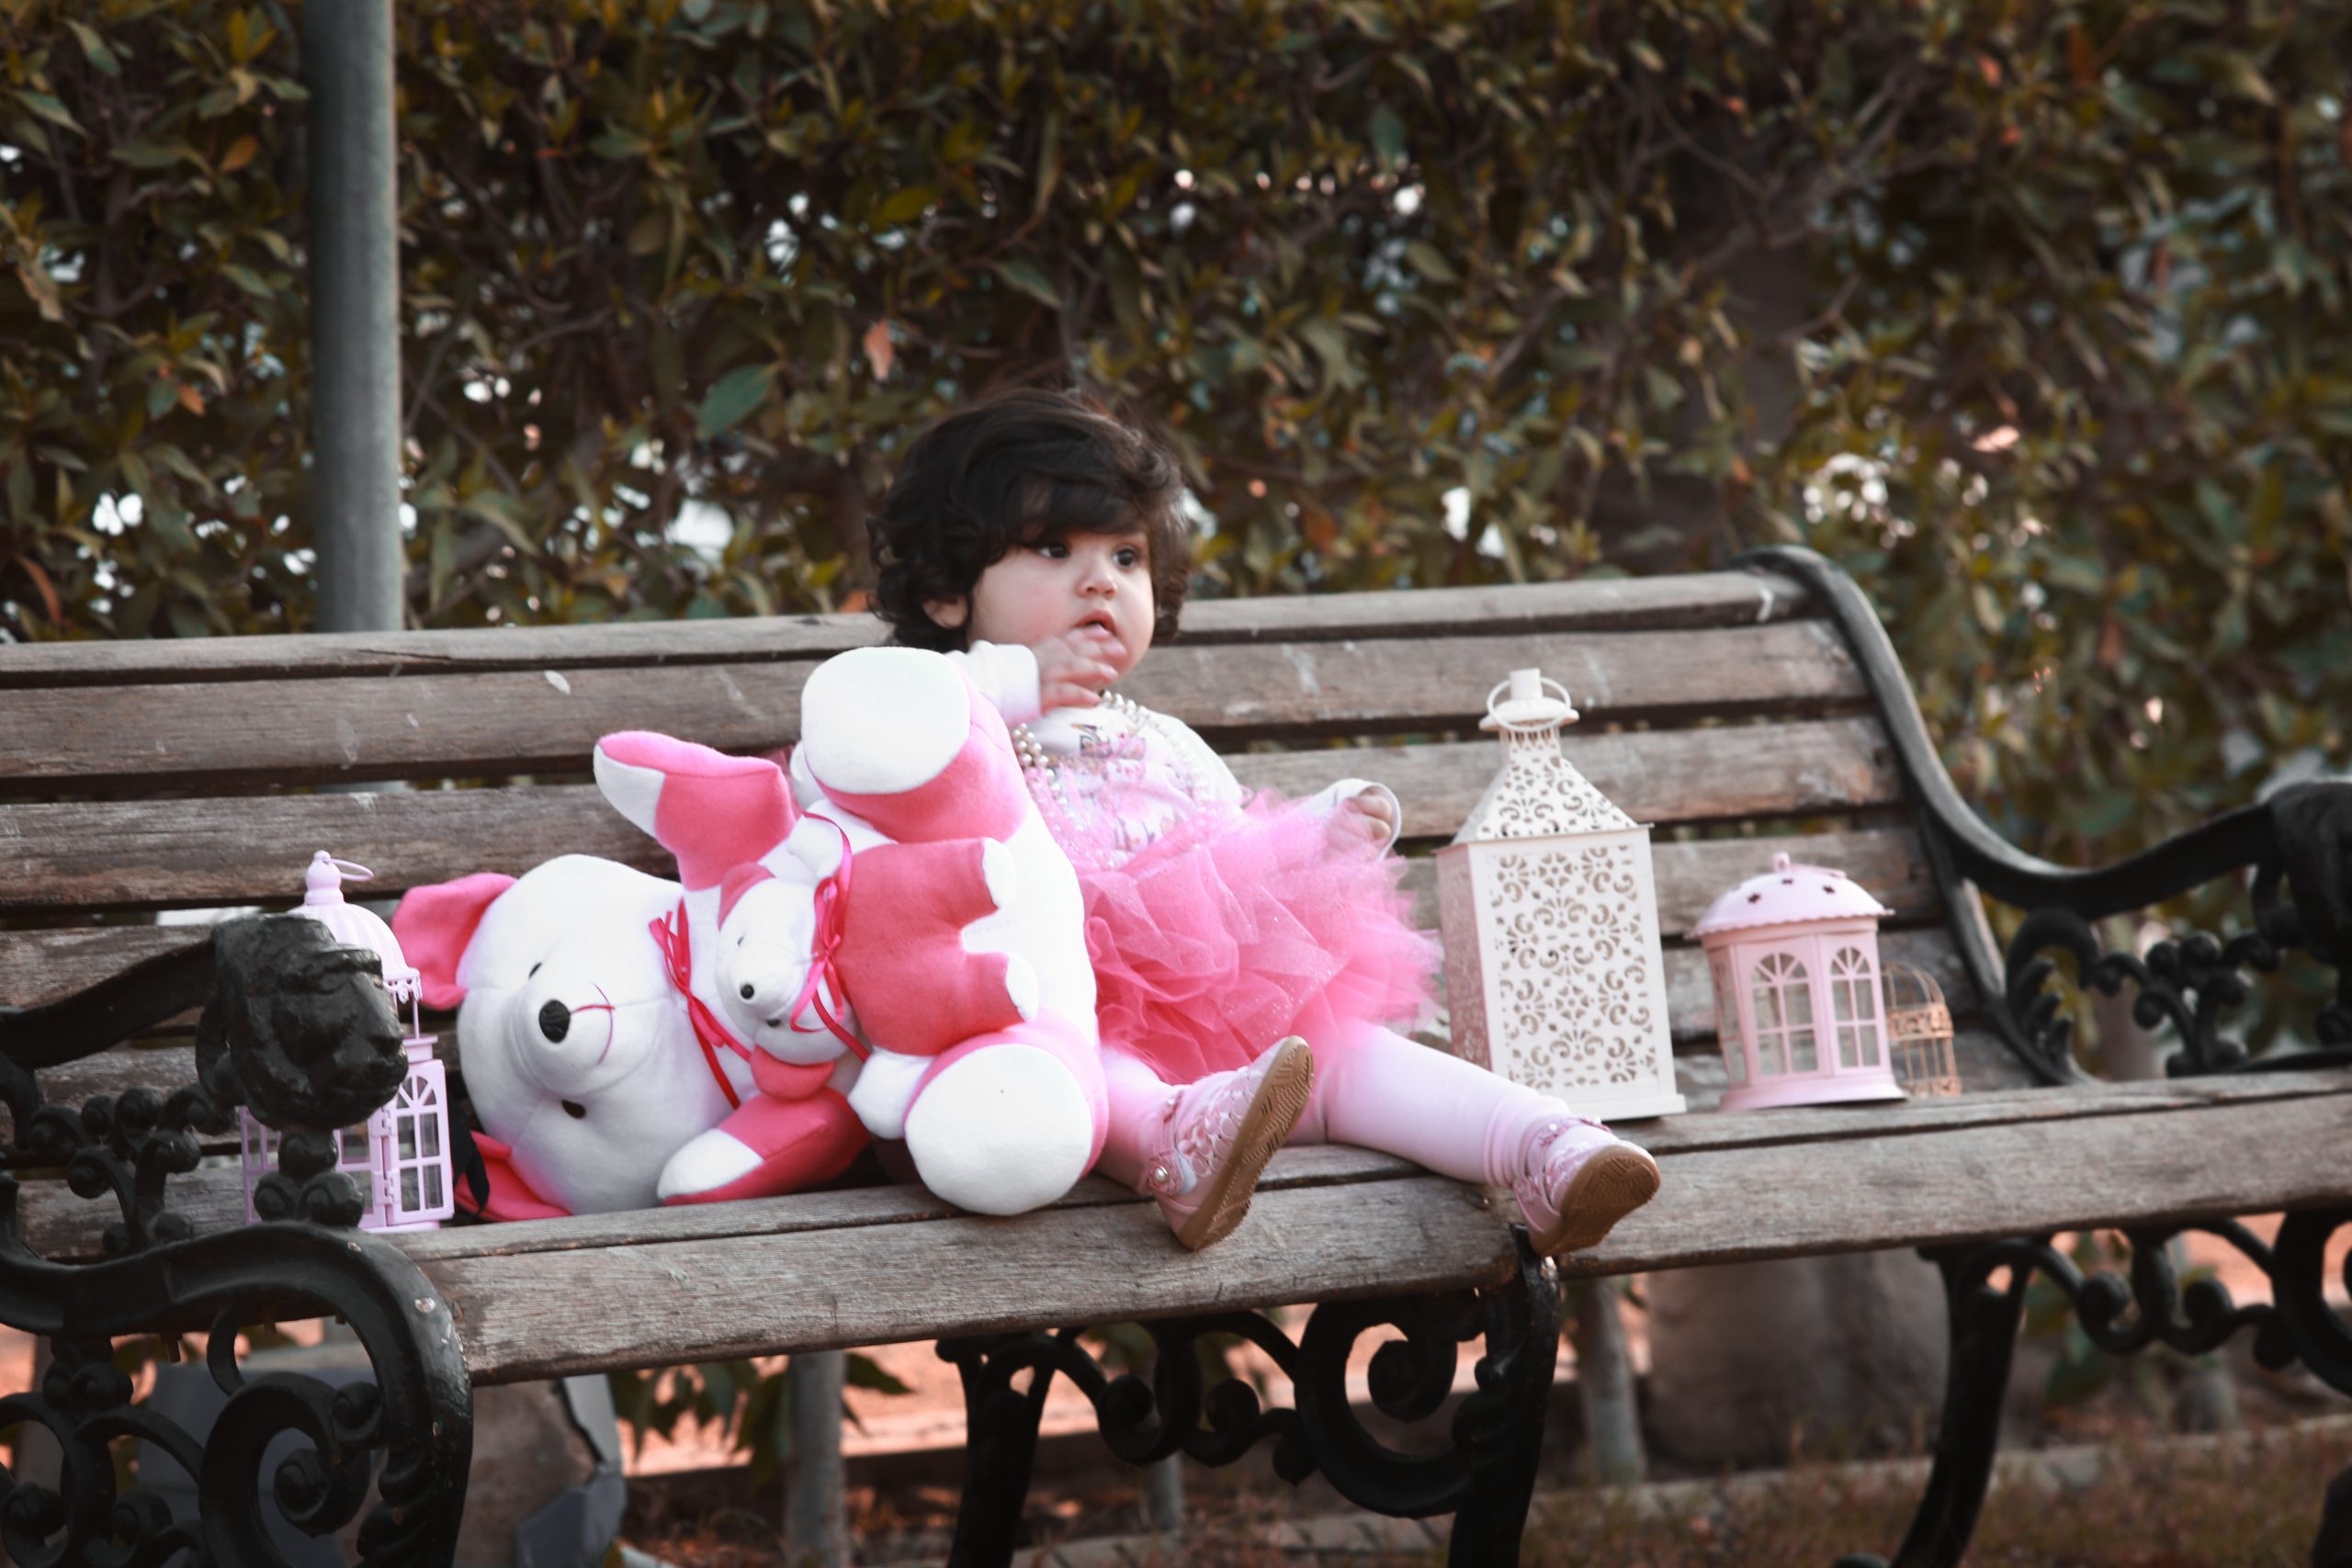 Cute One Year Little Baby Wearing Pink Fork Sitting on a bench at the park